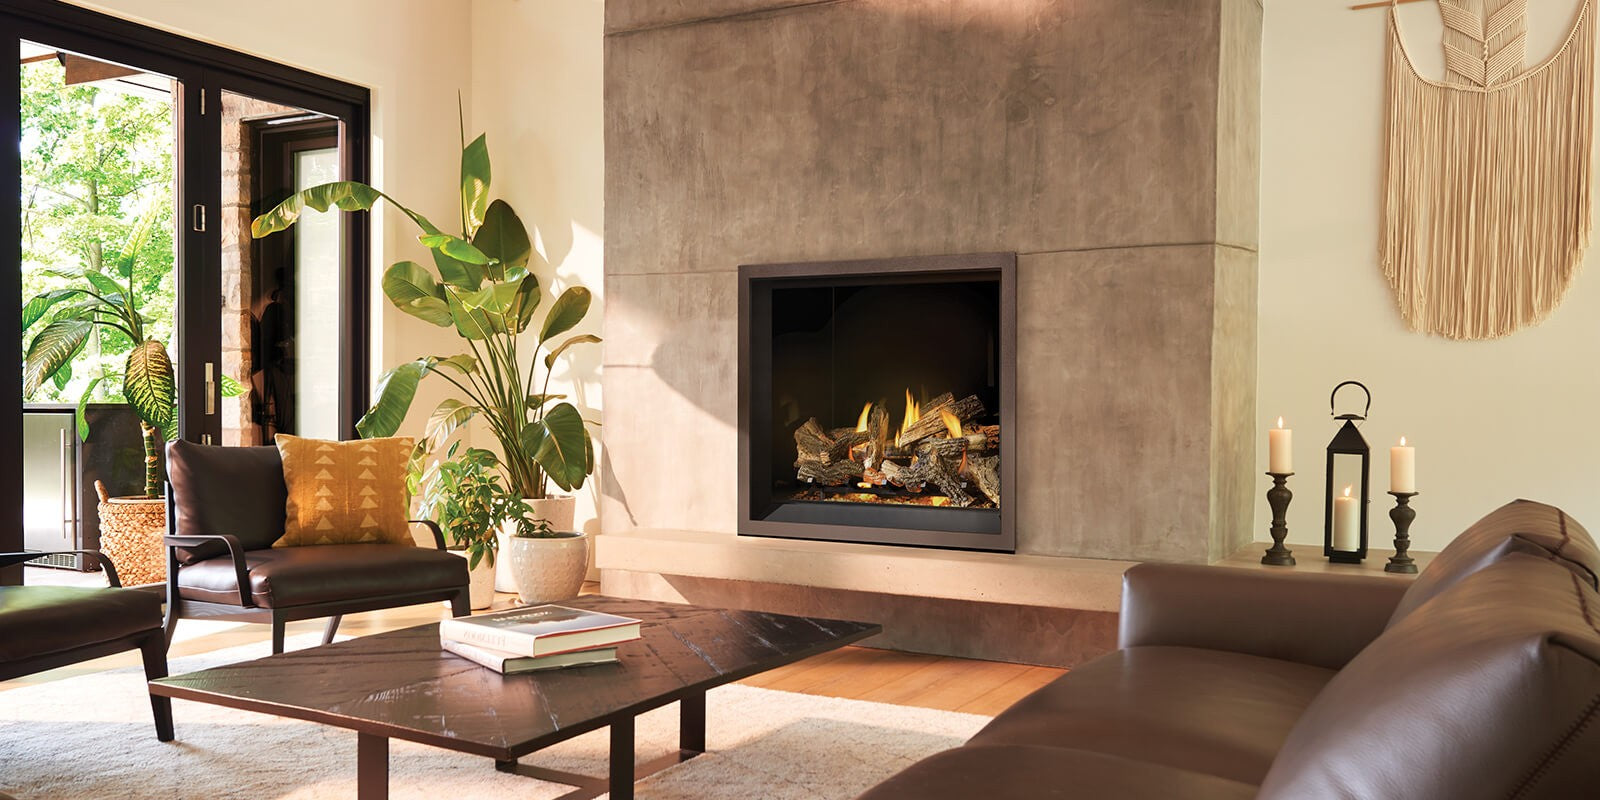 Napoleon Elevation X Series Direct Vent Gas Fireplace